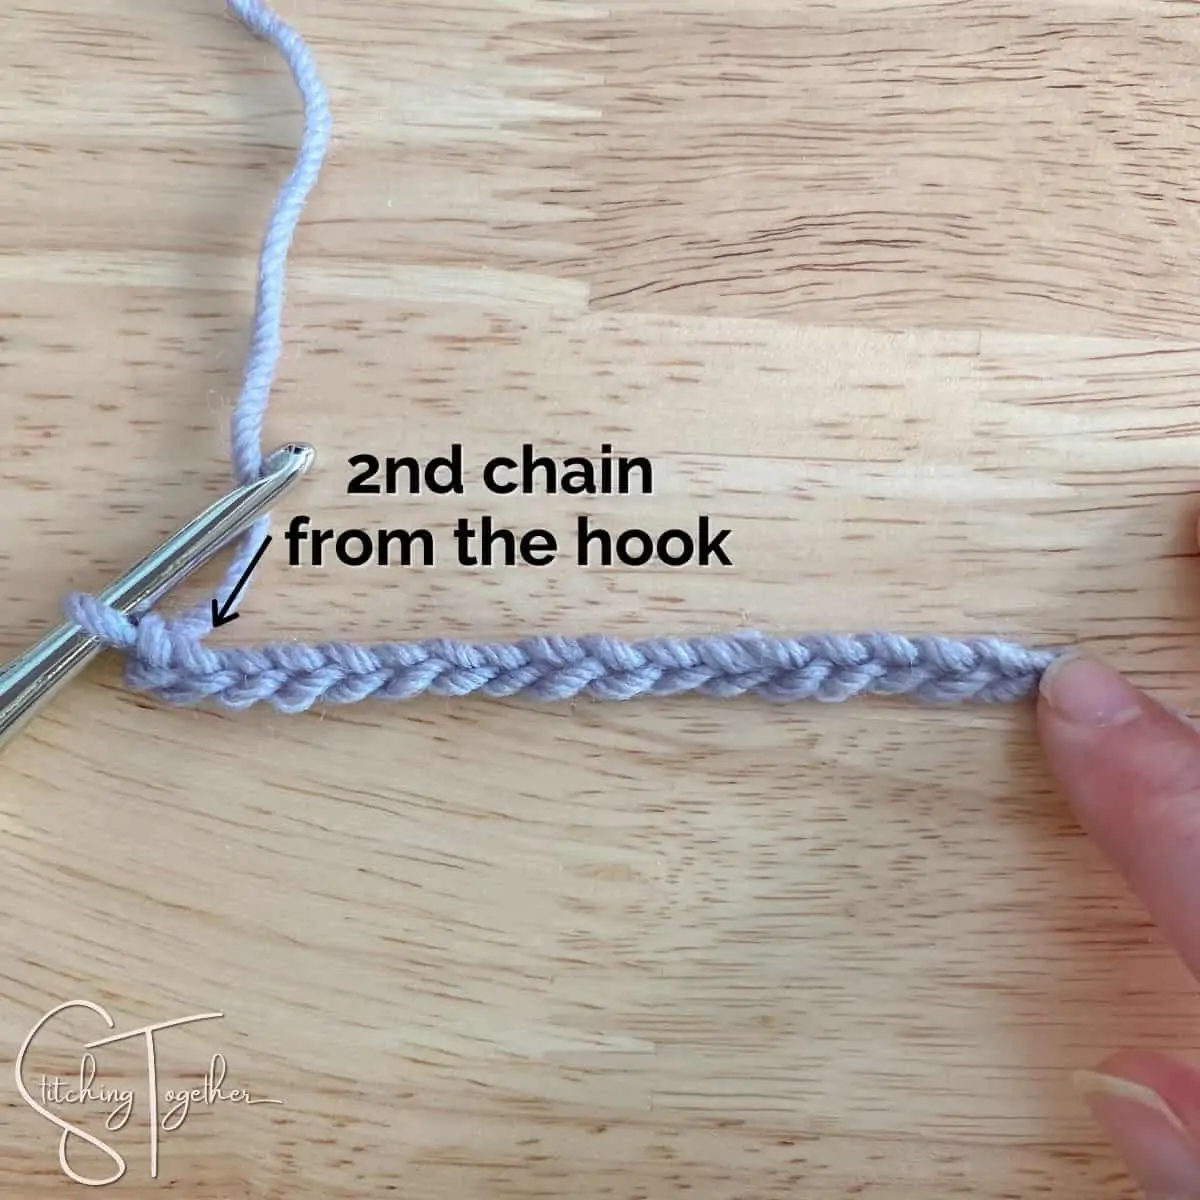 crochet chain with words and an arrow showing the second chain from the hook left